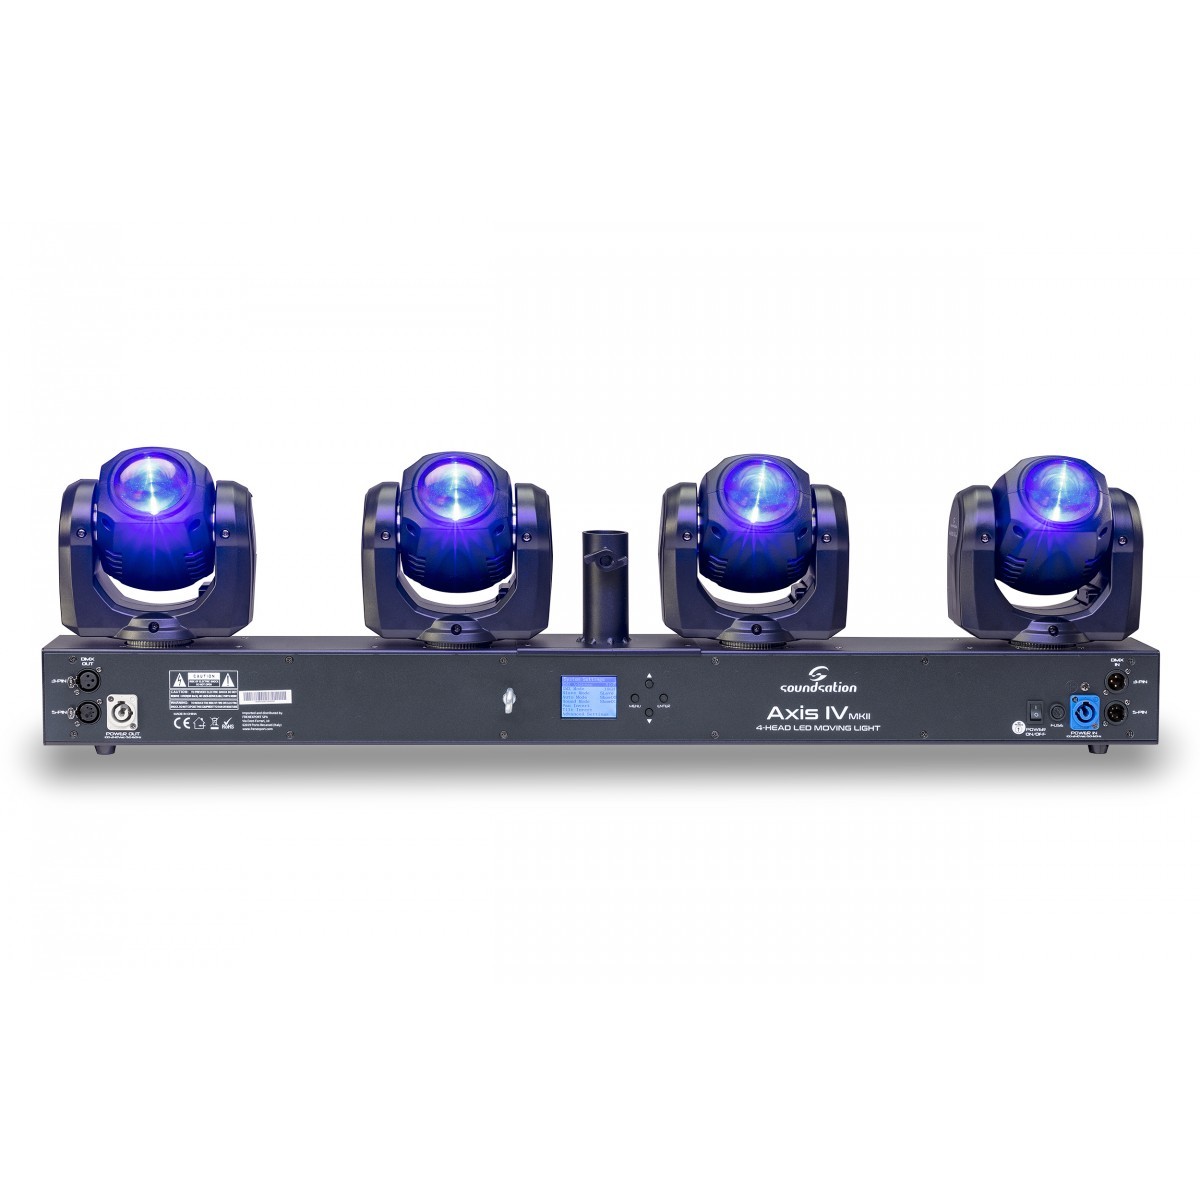 BARRA 4 TESTE MOBILI BEAM SOUNDSATION AXIS IV MKII 4x32W RGBW 4IN1_2